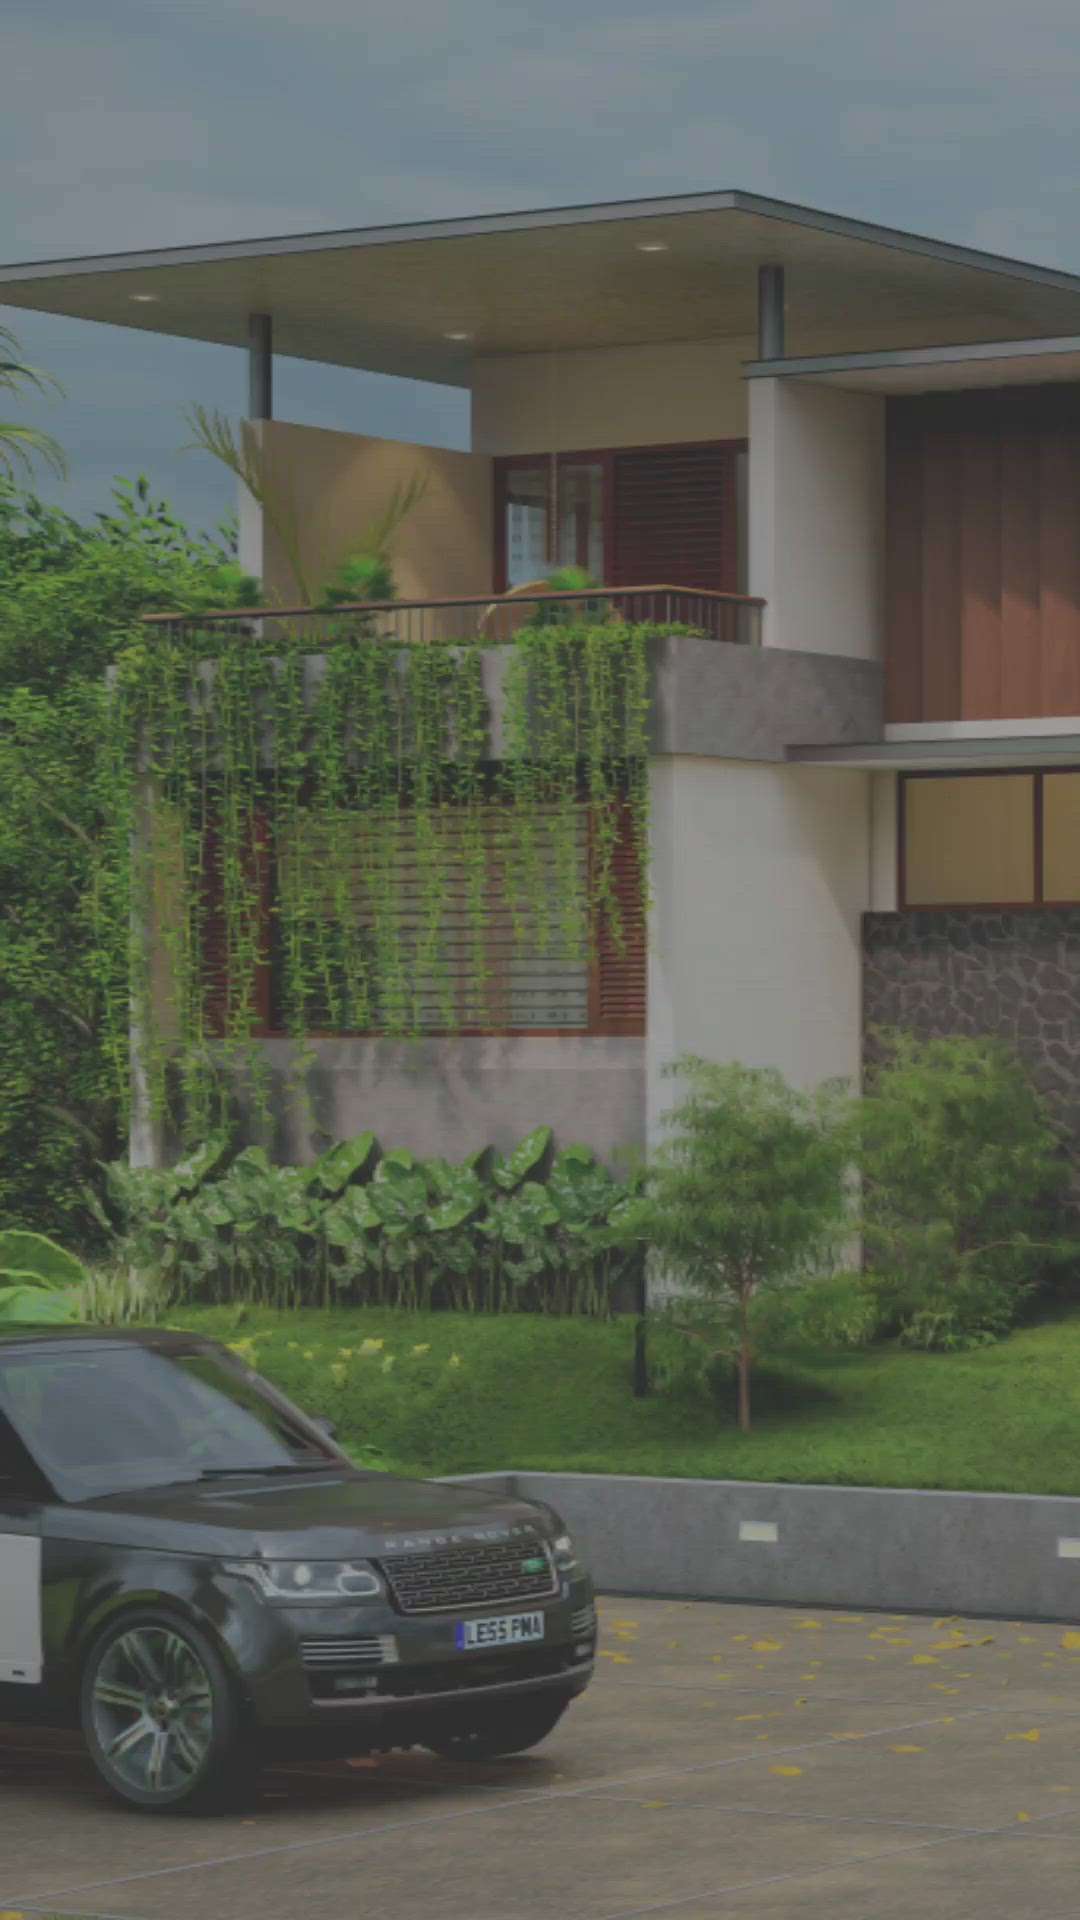 Project Type - Residence
Location - Kozhikode
Area- 3500Sqft

This minimalist contemporary home is built on a Land with many contours.
This slope of the land is retained and the site was developed with retaining the different levels.

The parking area is also a badminton court where the family can host parties as well.

 
 #Kollam  #Kerala #ElevationHome #ElevationDesign #3dhouse #3D_ELEVATION #HouseDesigns #Architect #spatialux #spatialuxdesigns #ContemporaryHouse #ContemporaryDesigns #modernhome #moderndesign #architecturedesigns #architecture #Kozhikode #spatialuxdesign #spatialuxdesigns #ContemporaryHouse #luxuryvillas #luxuryhome